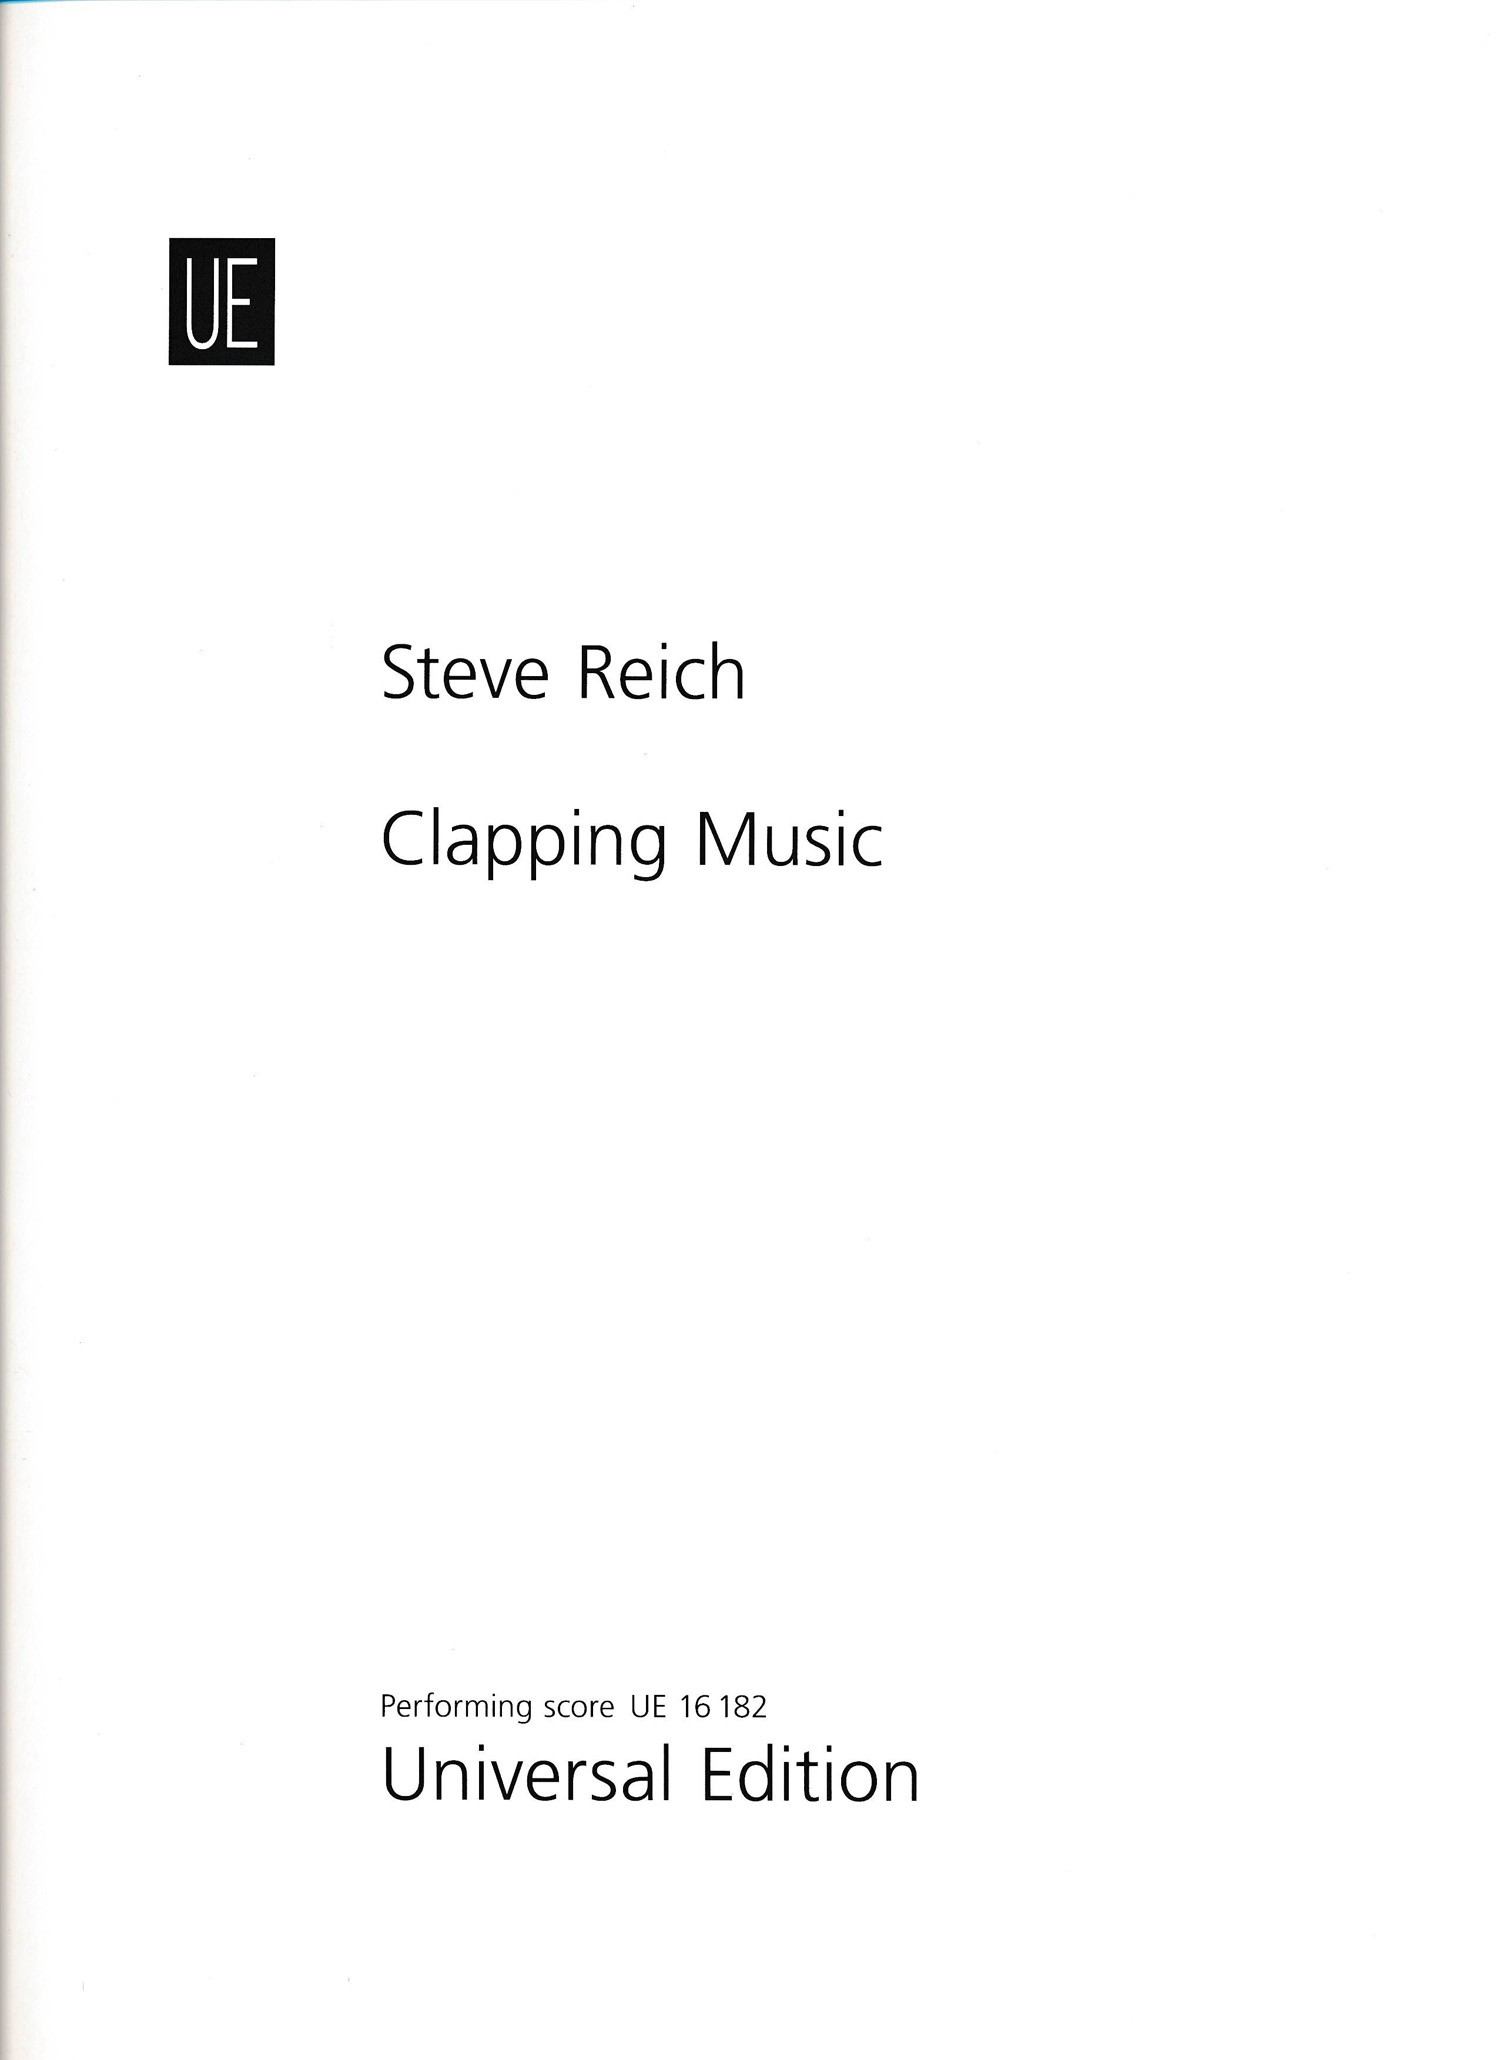 Clapping Music